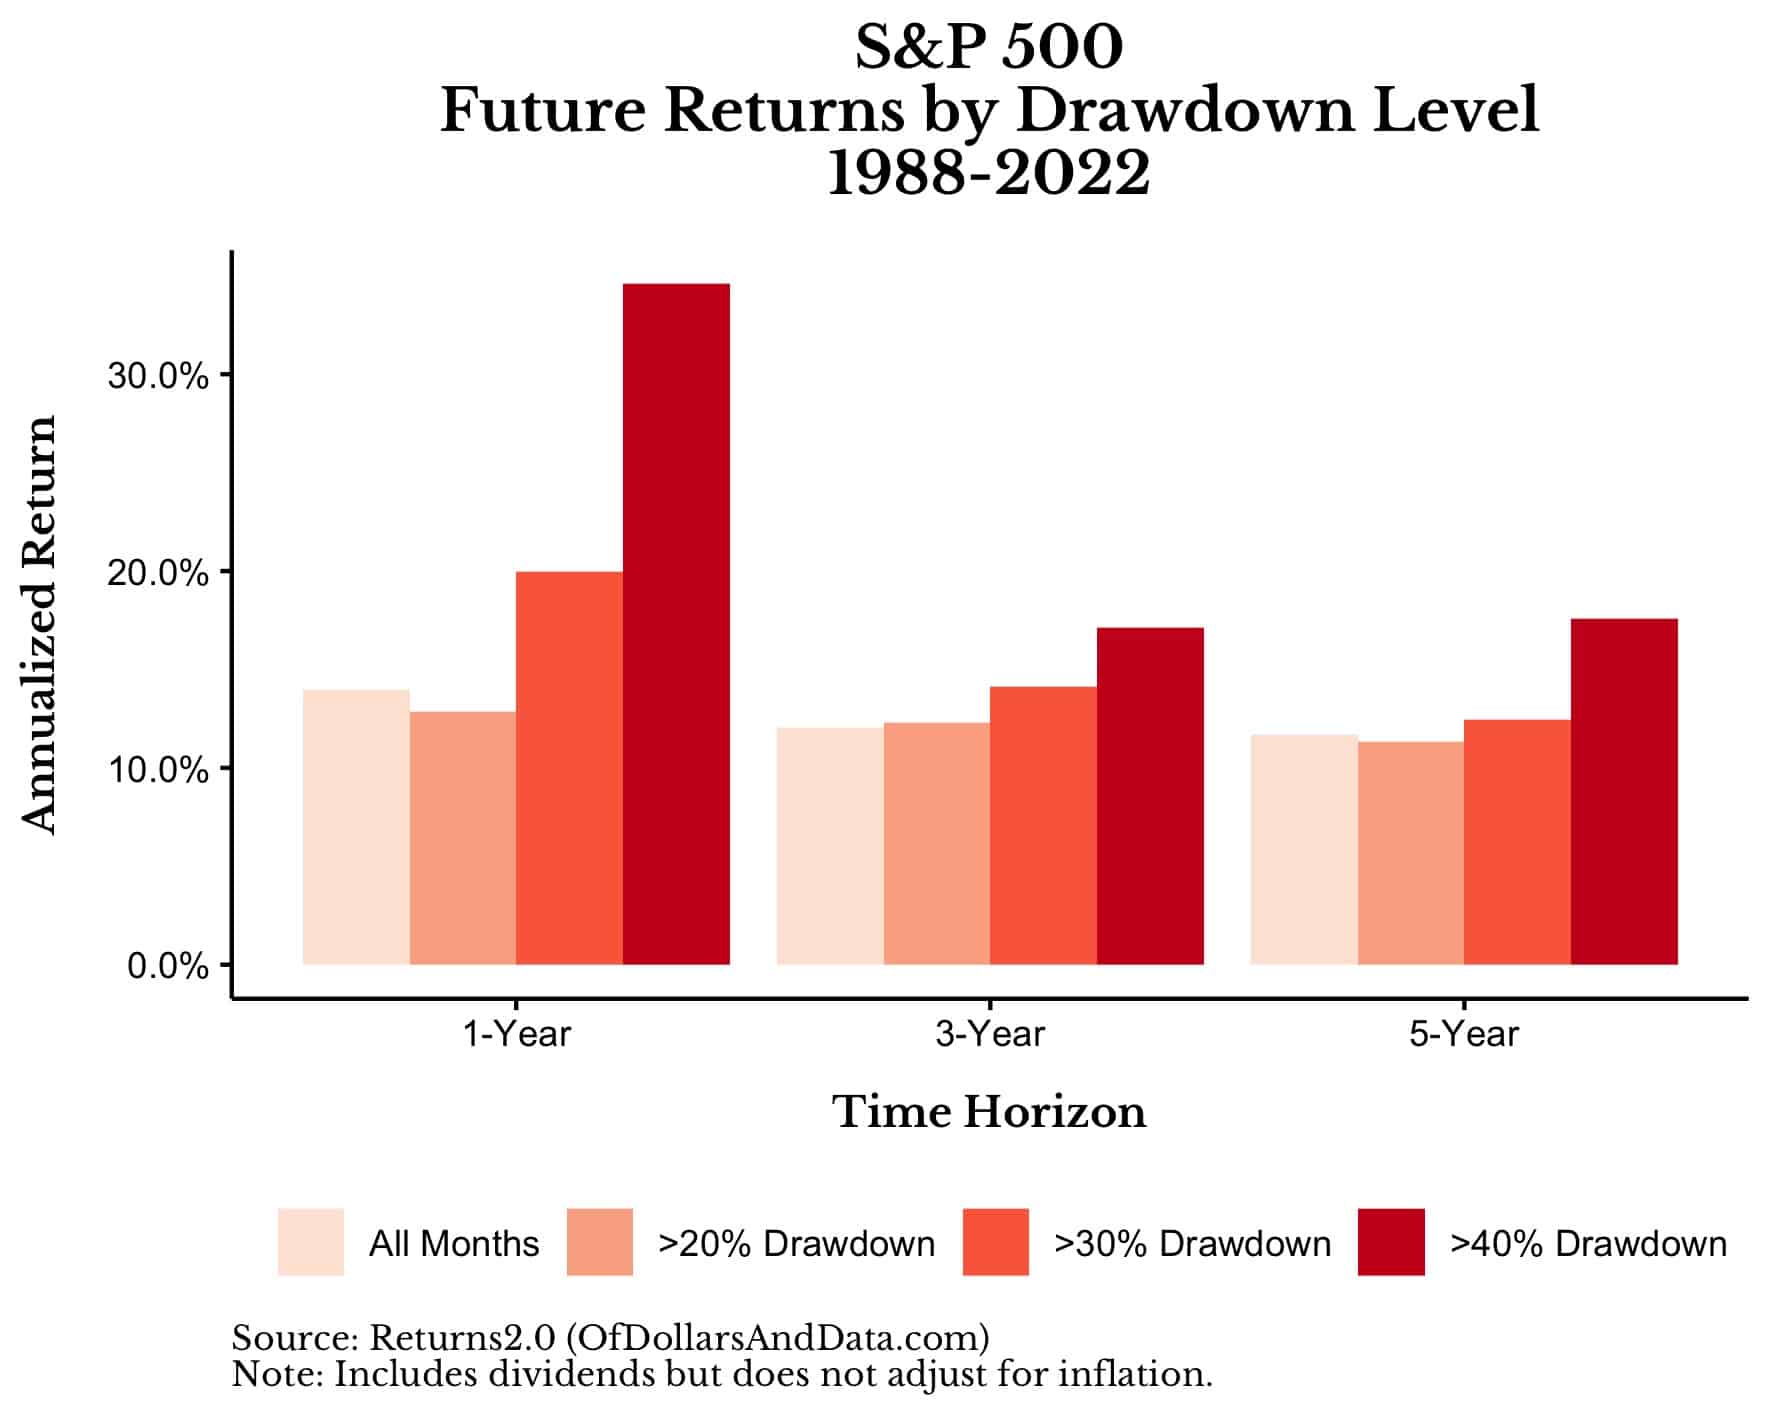 S&P 500 future returns by drawdown level from 1988-2022